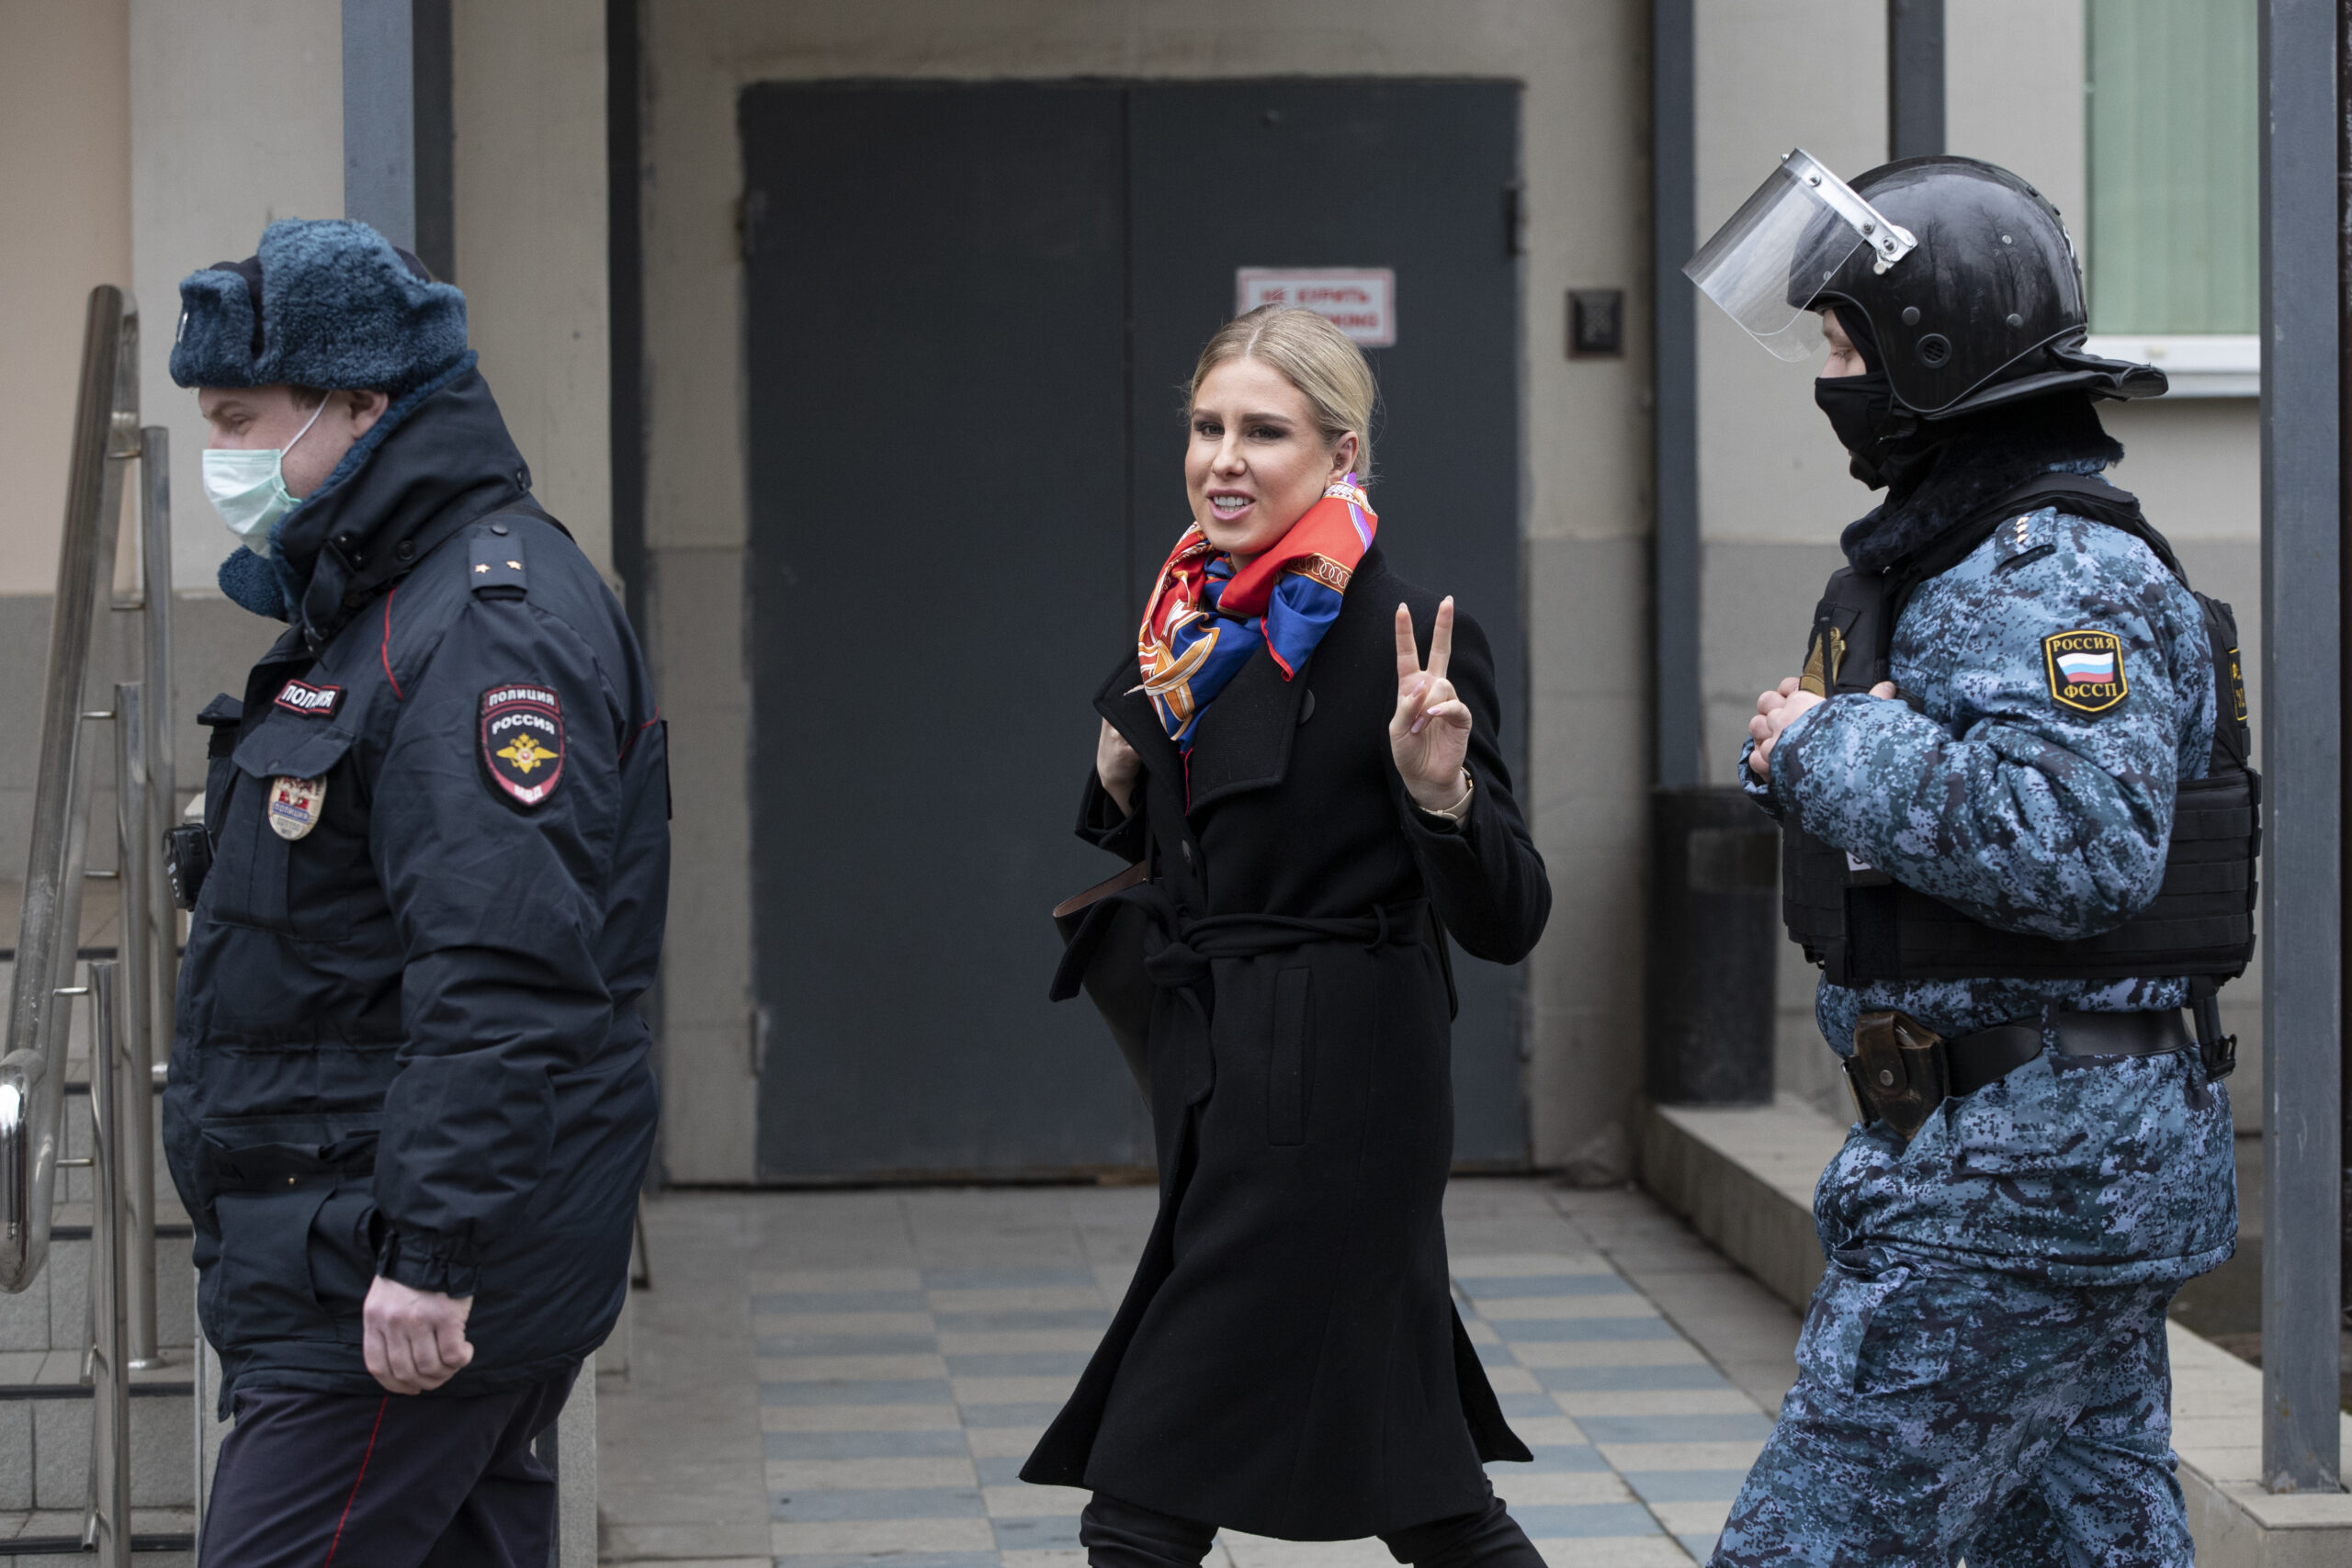 Russian opposition activist Lyubov Sobol, center, gestures as she walks to the court escorted by police and Russian Federal Bailiffs service officers in Moscow, Russia, Monday April 5, 2021. A Moscow court will start considering the case against Navalny ally Lyubov Sobol, who is charged with unlawful entry into a dwelling. In December Sobol rang the doorbell of a flat of a relative of an alleged FSB agent Konstantin Kudryavtsev, whom Navalny accused of his poisoning. (AP Photo/Pavel Golovkin)